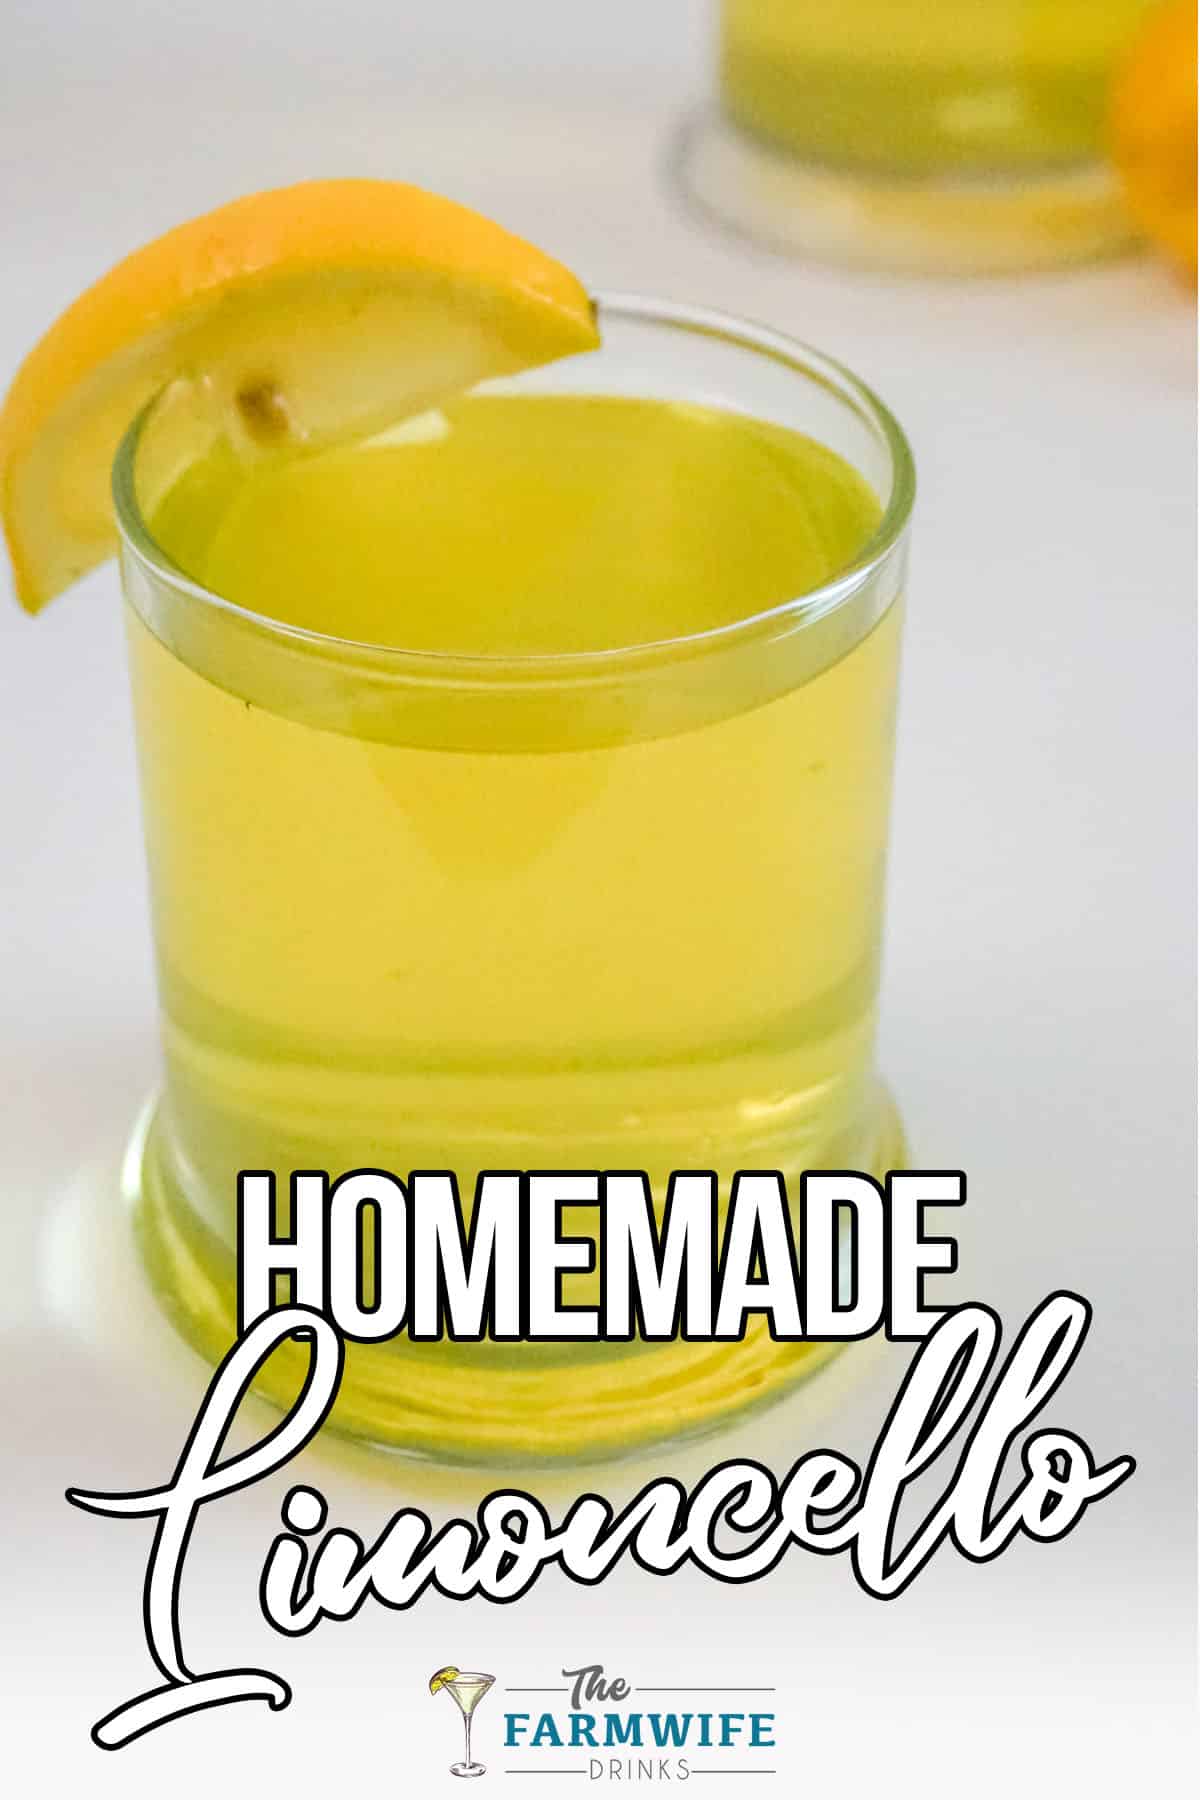 limoncello in a glass with text which reads homemade limoncello